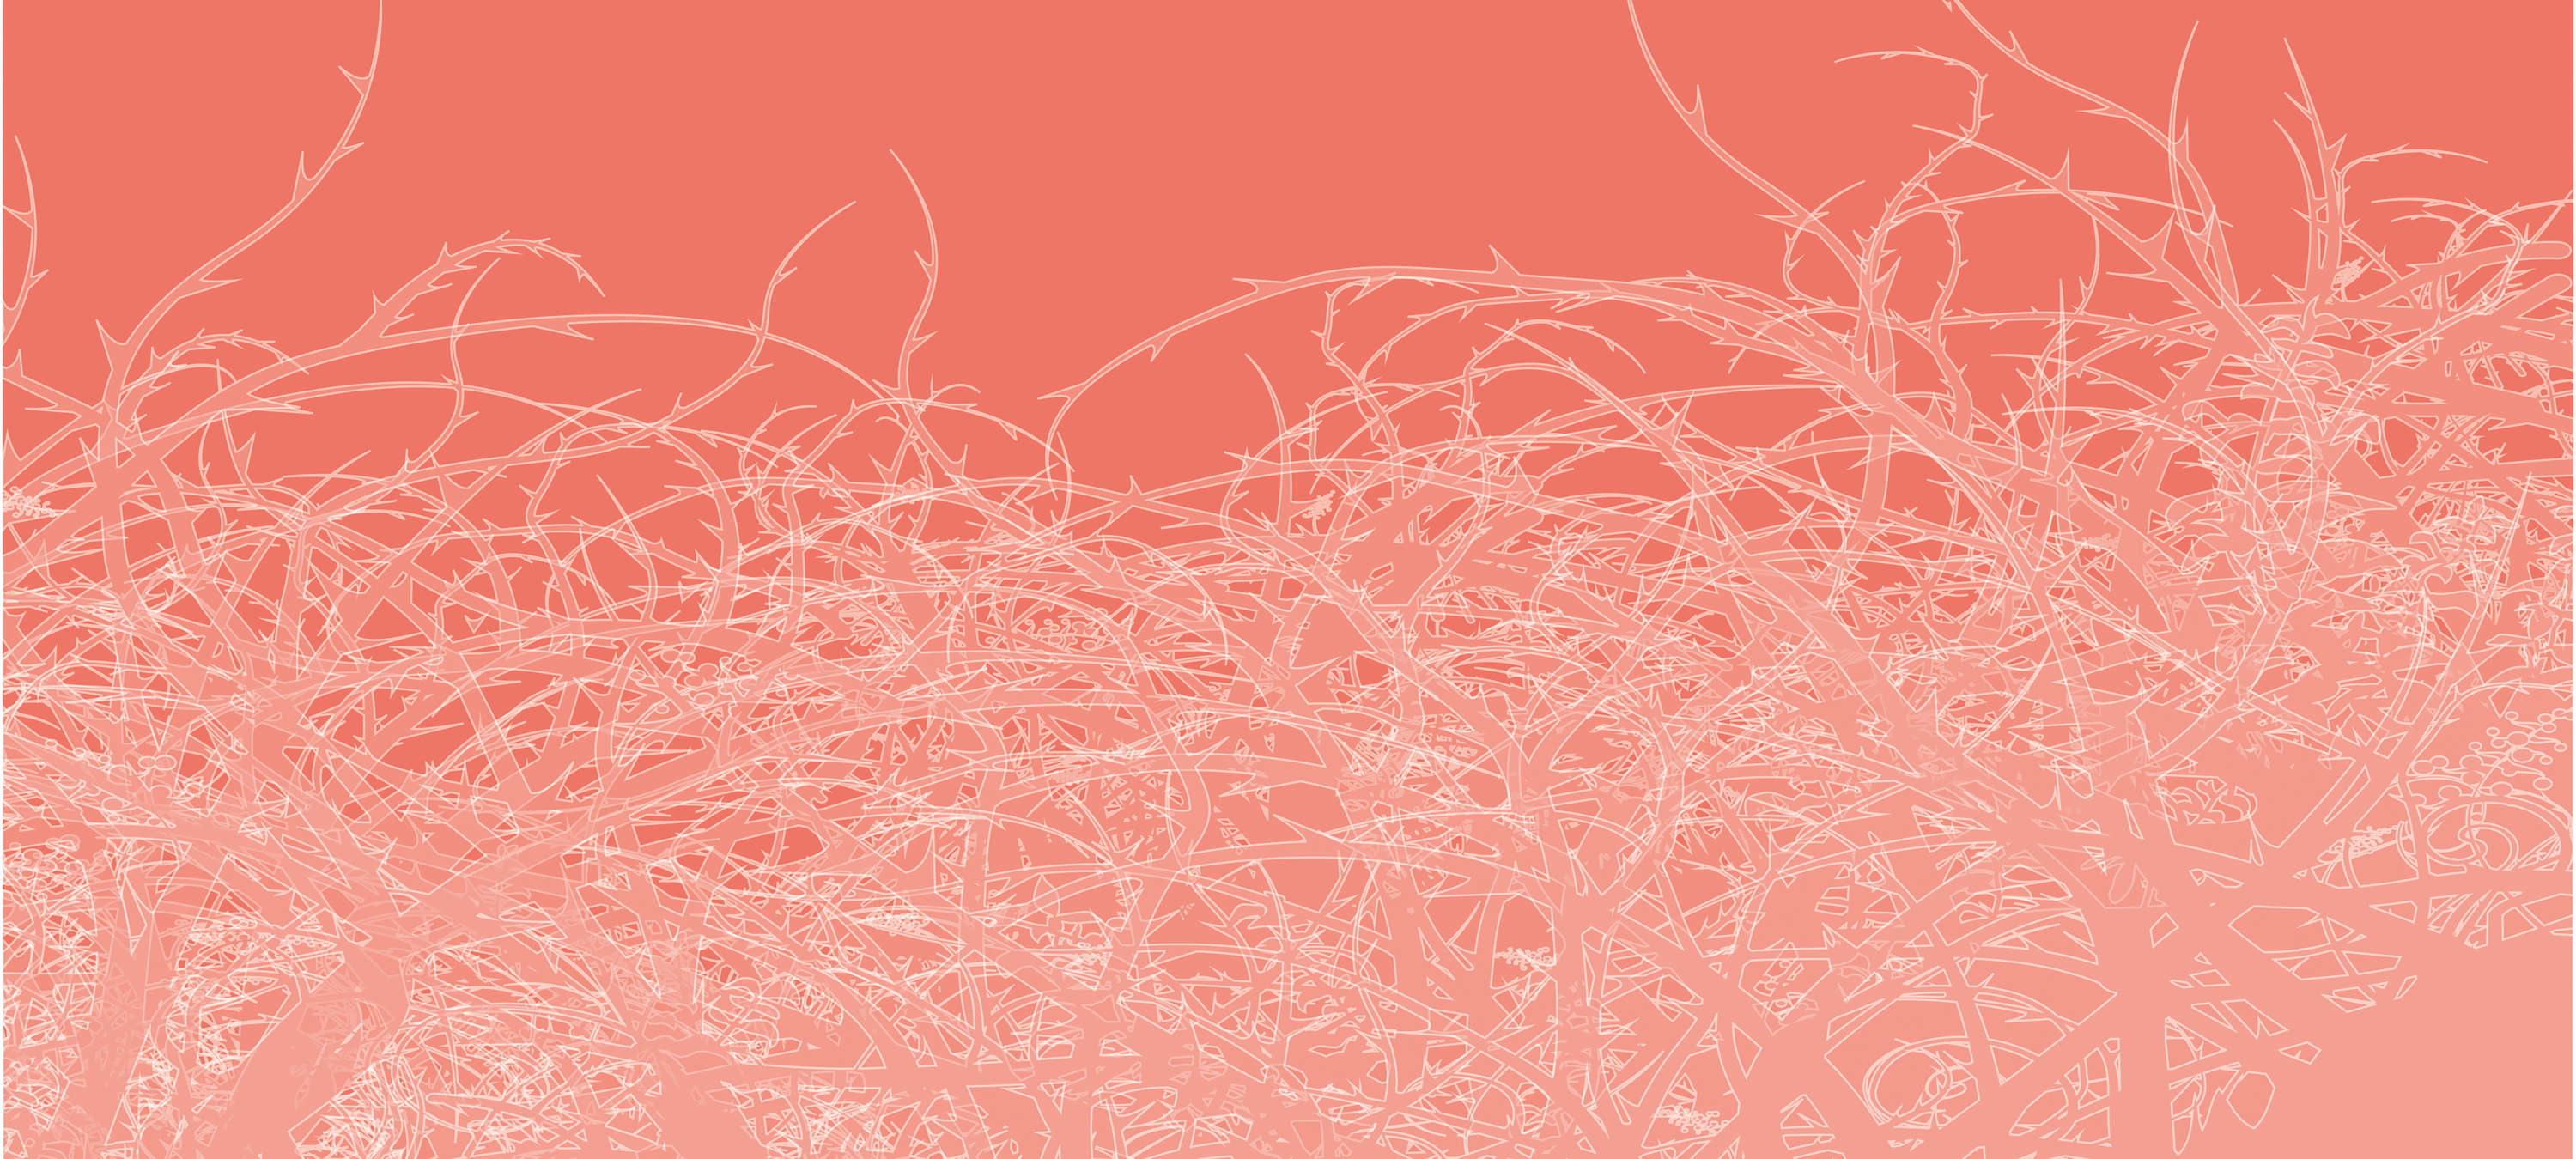             Graphic Design Thorny Vines Behang - Roze, Wit, Rood
        